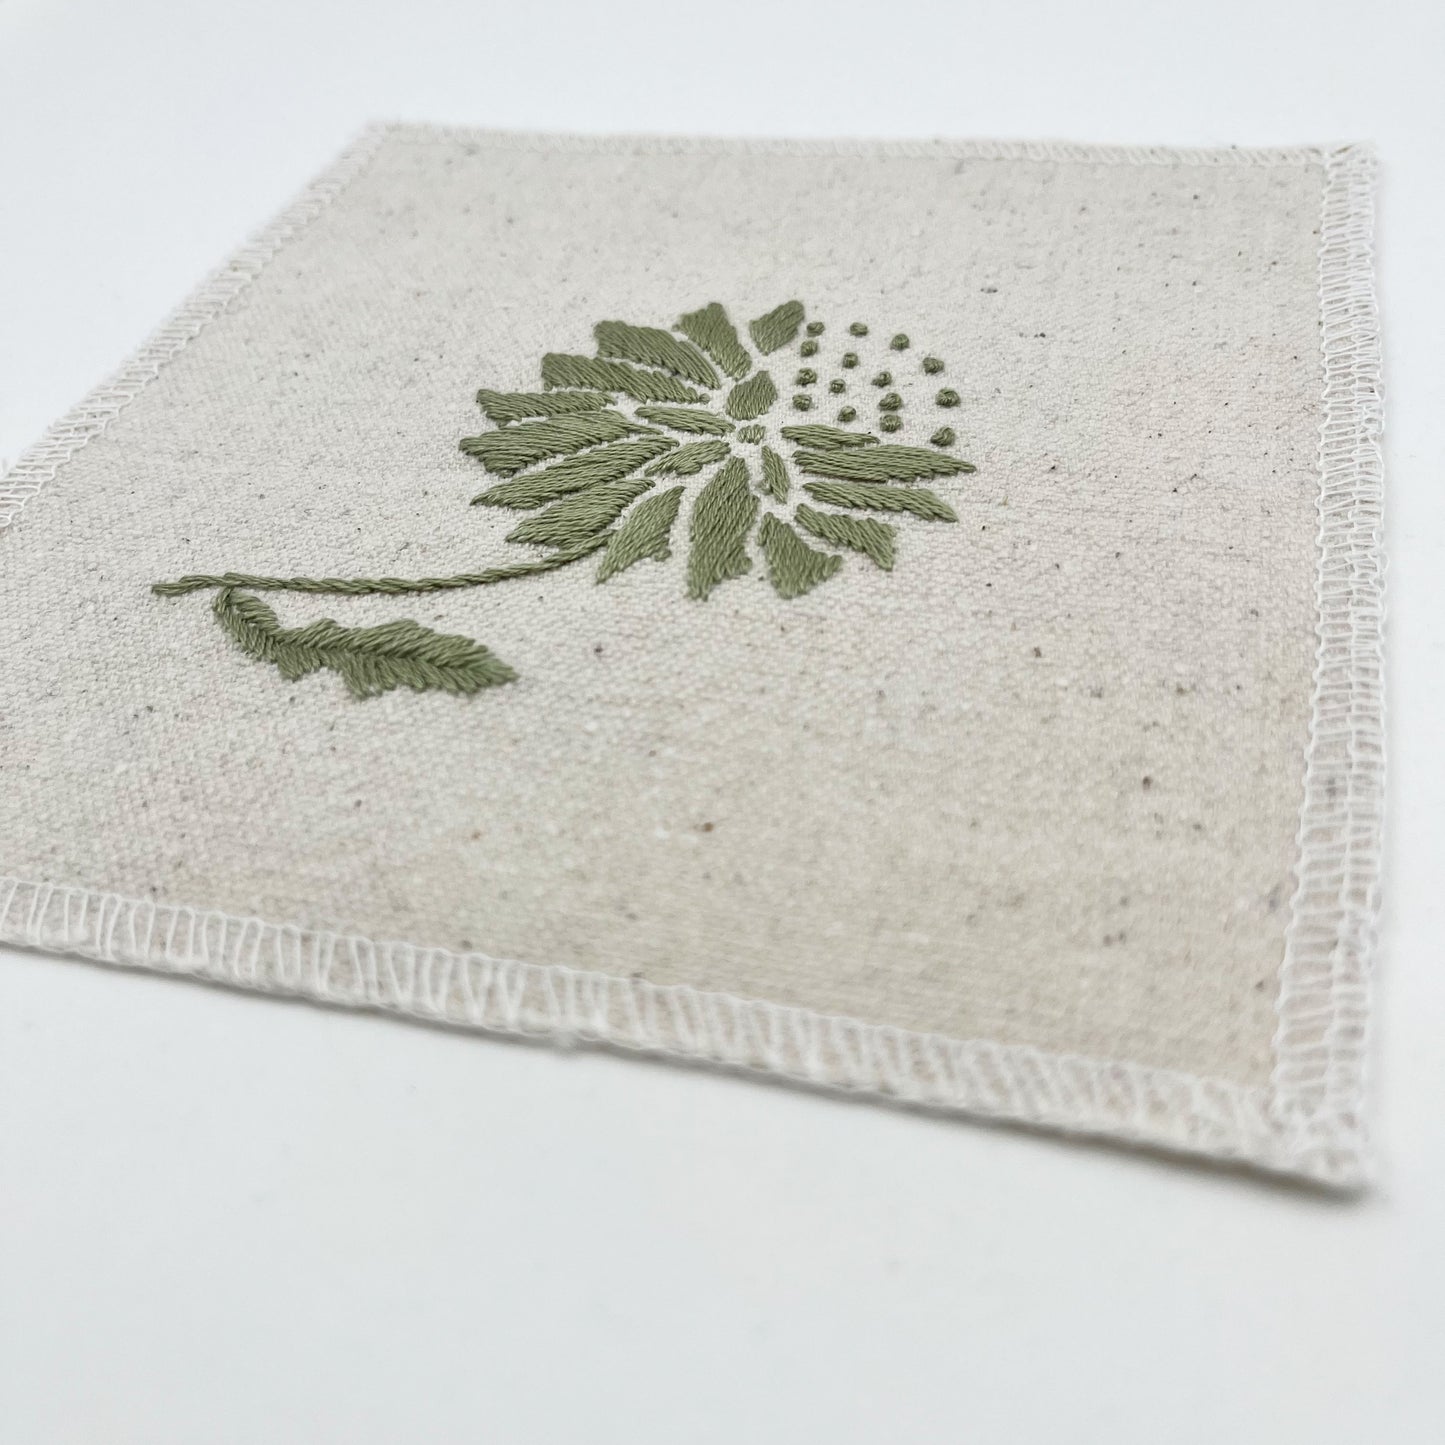 a close up angled view of a square patch in natural colored fabric, hand embroidered with a sage colored abstract dandelion made mostly of petals, with a quarter of them replaced with french knots, with overlocked edges, on a white background